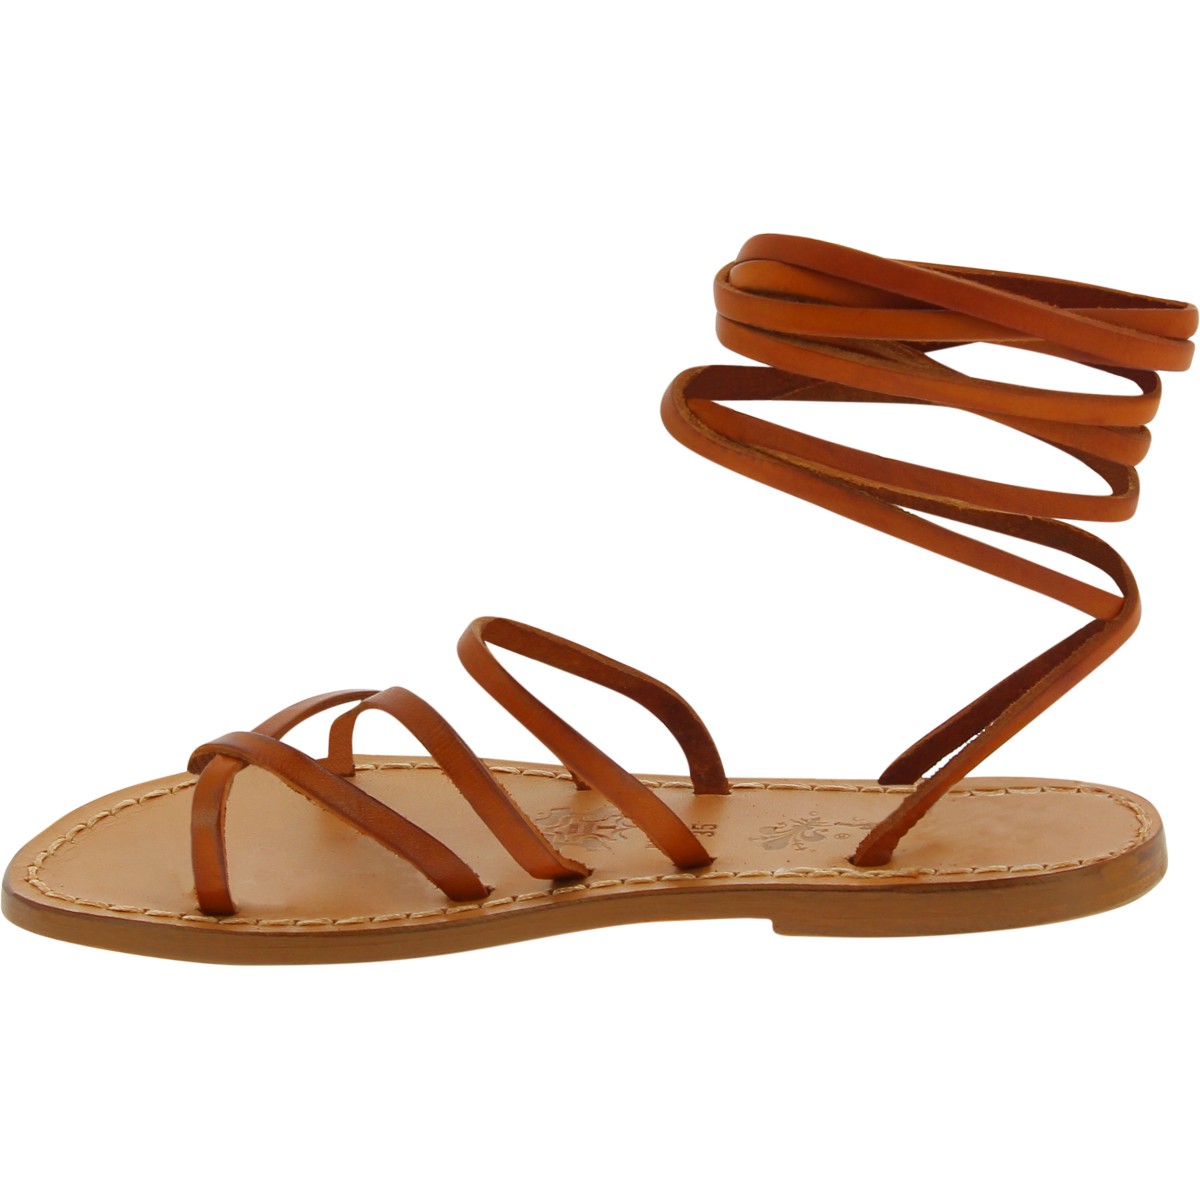 Women's tan strappy leather sandals handmade in Italy | The leather ...